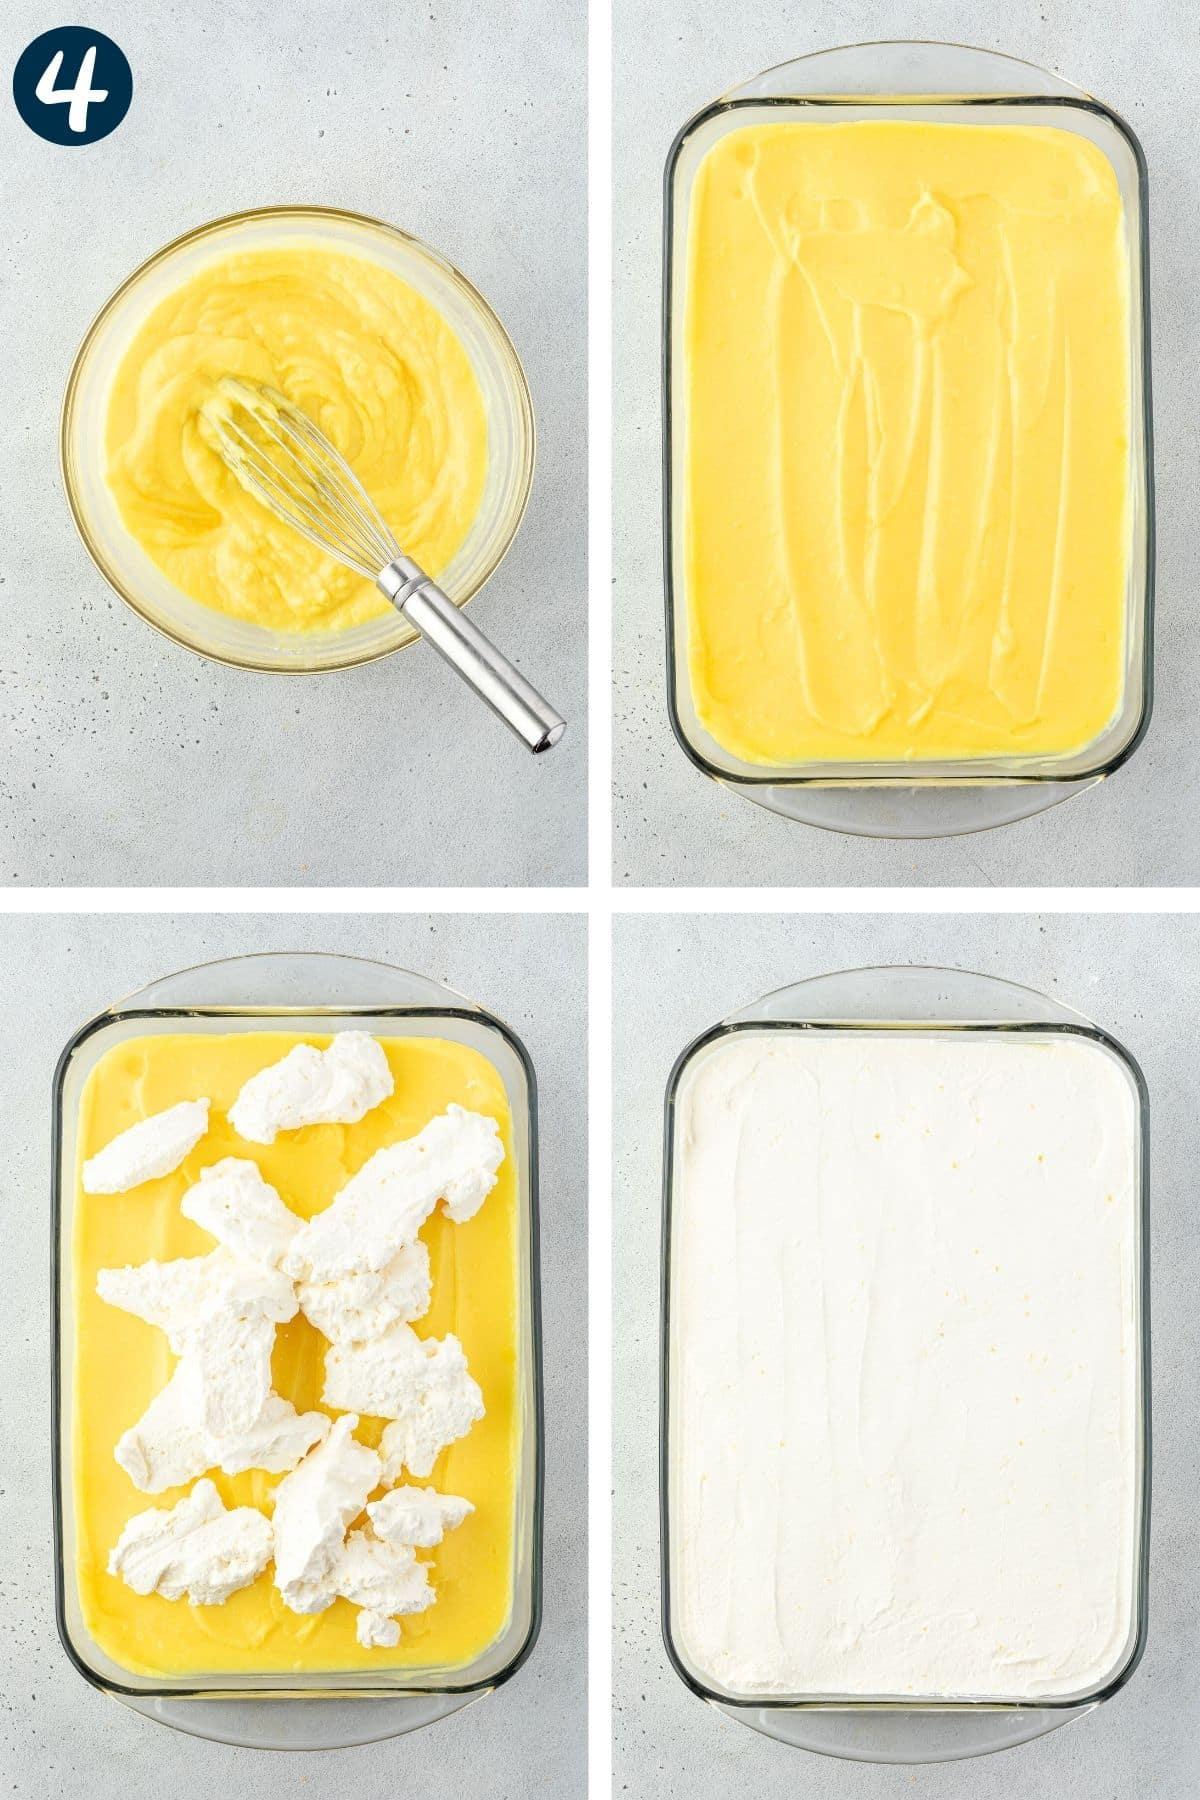 4 images: Lemon pudding in bowl with whisk, spread onto dessert, whipped cream dolloped on dessert, then spread.